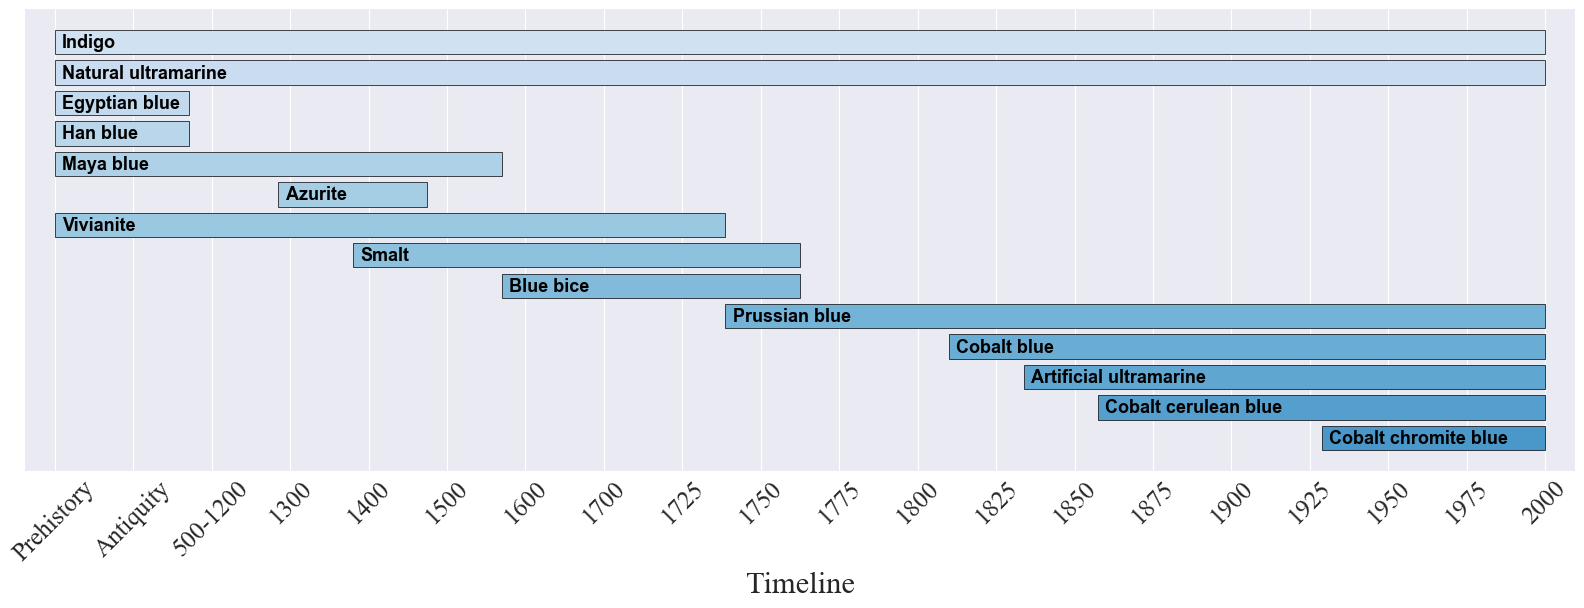 Timeline of blue pigments usage through history